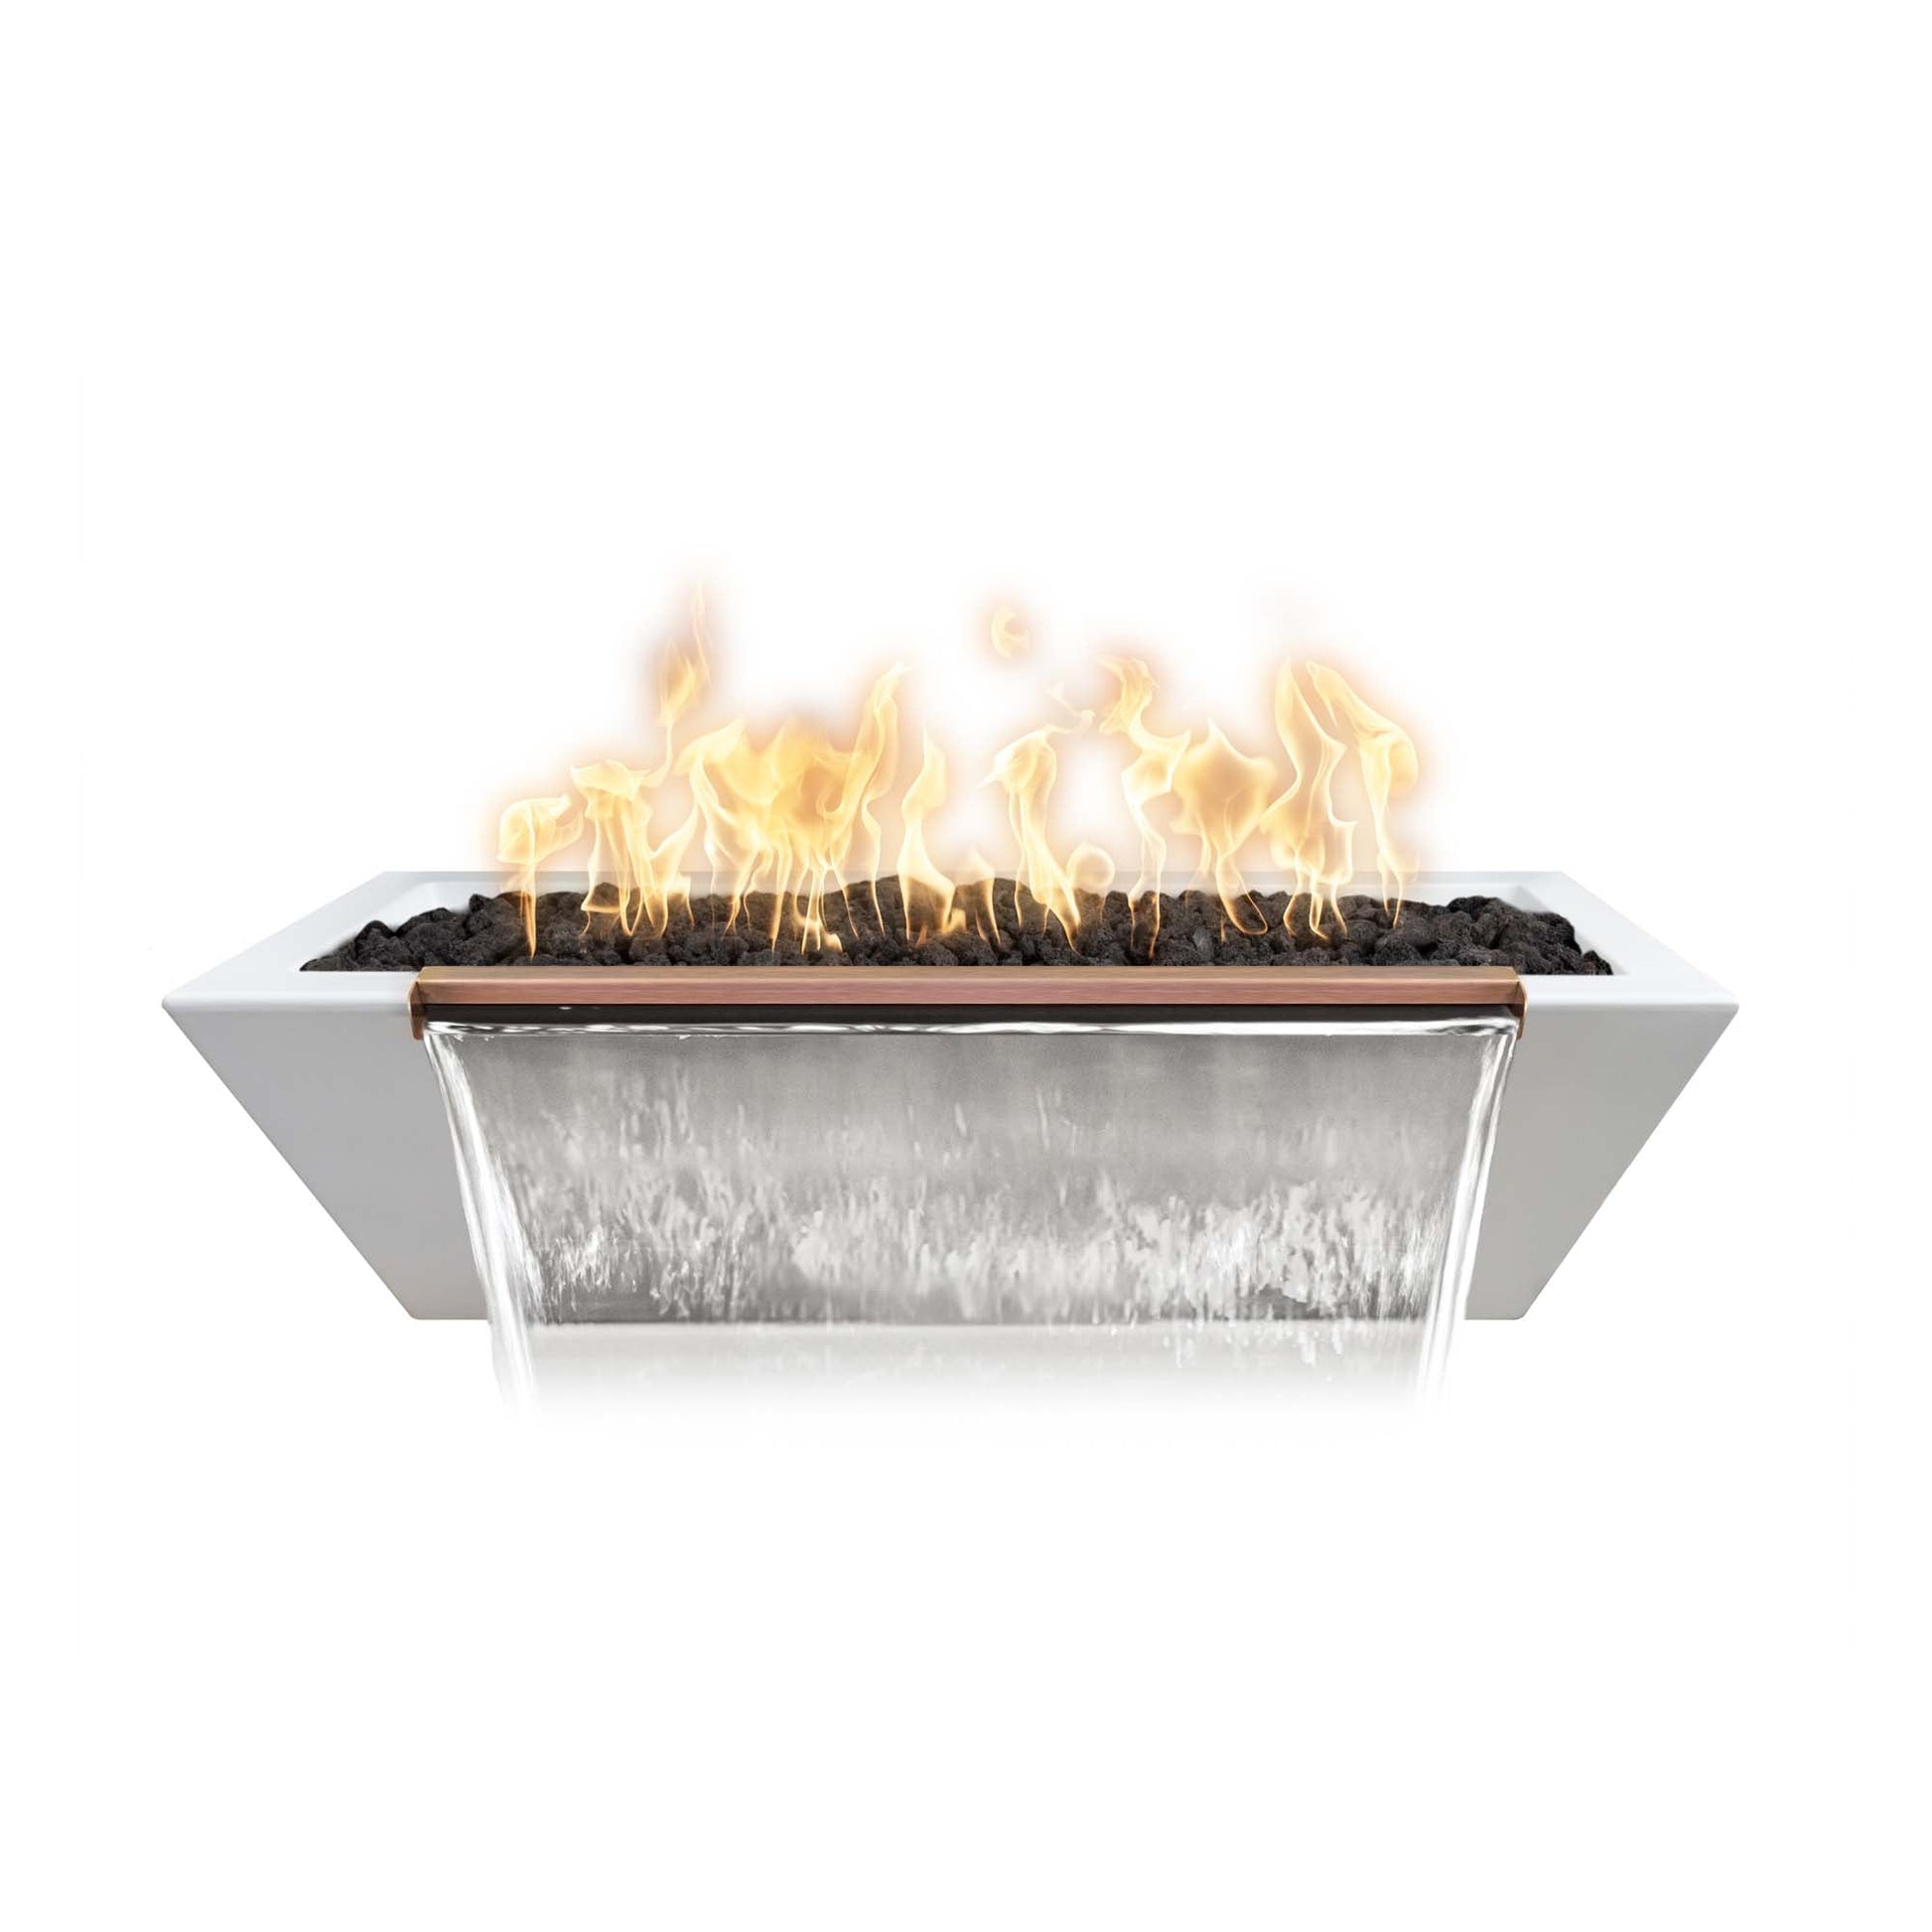 The Outdoor Plus Linear Maya 60" White GFRC Concrete Liquid Propane Fire & Water Bowl with Match Lit with Flame Sense Ignition